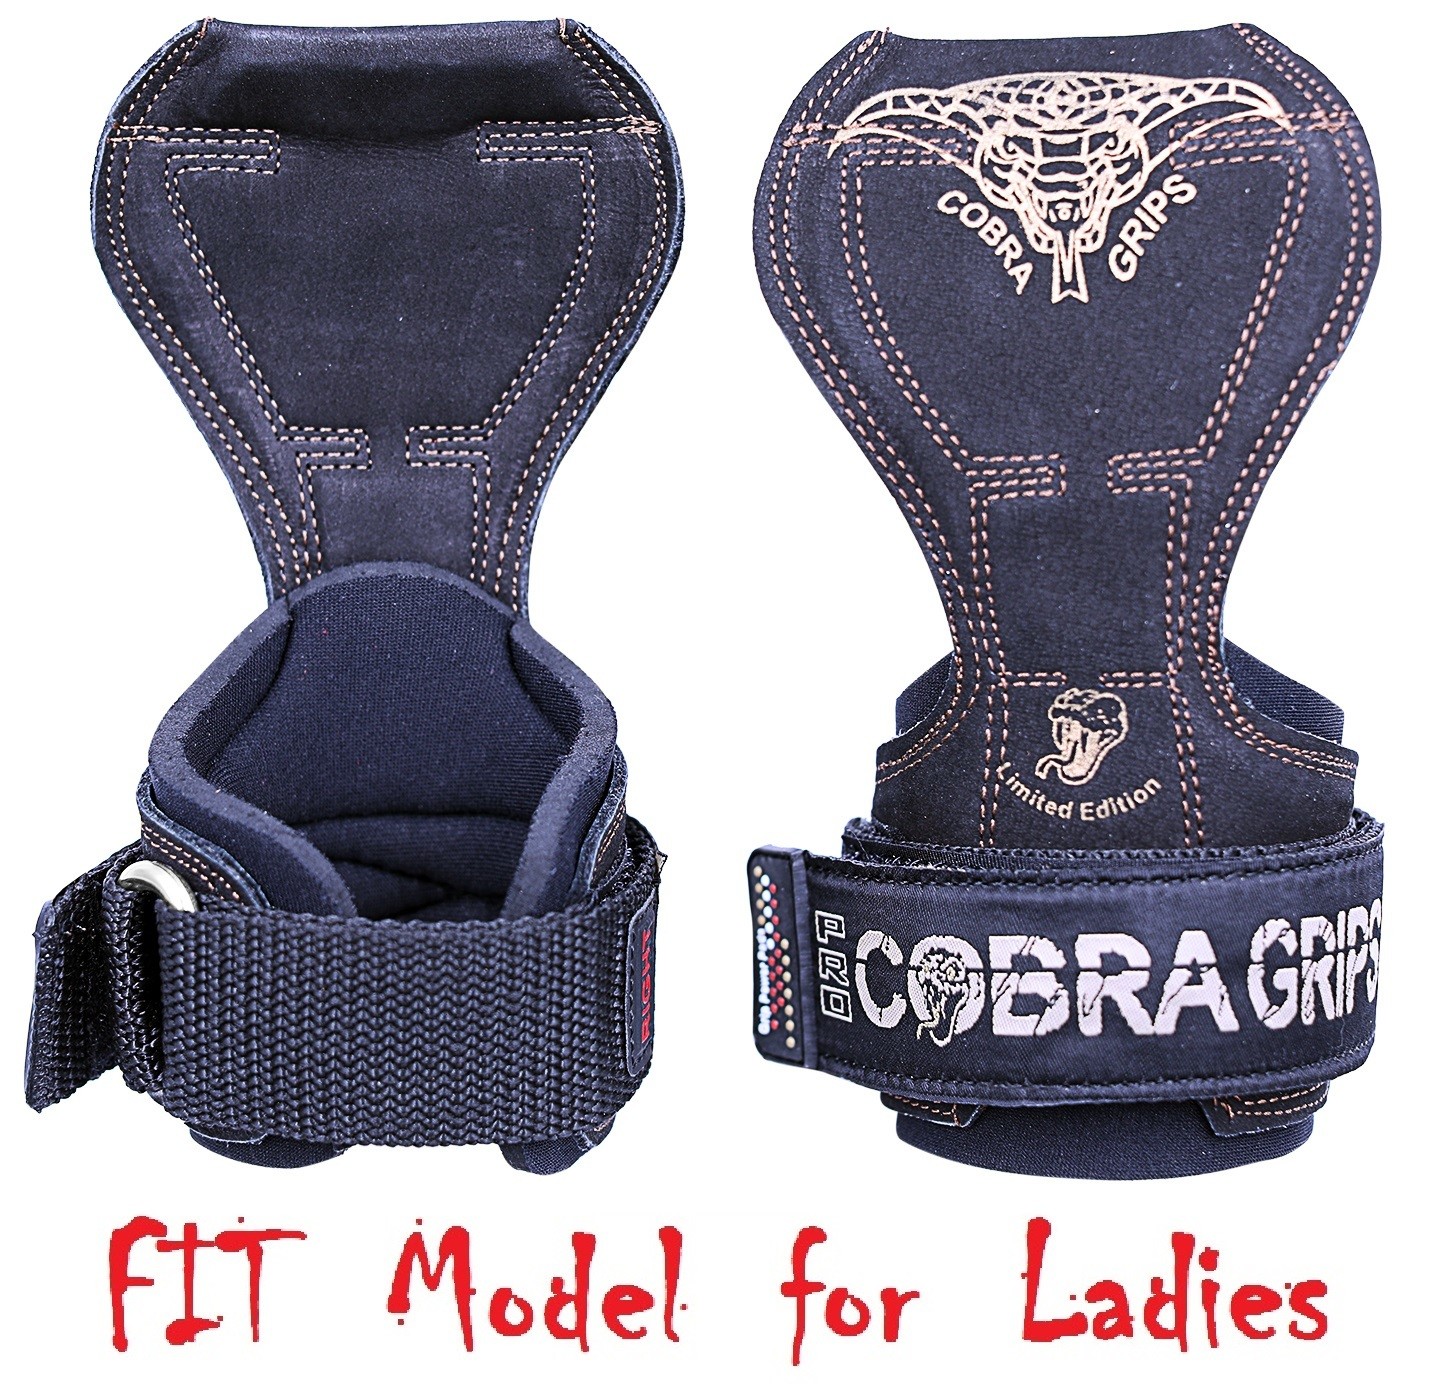 Cobra Grips FIT BLACK LEATHER Weight Lifting Straps Hooks Alternative, Power Lifting